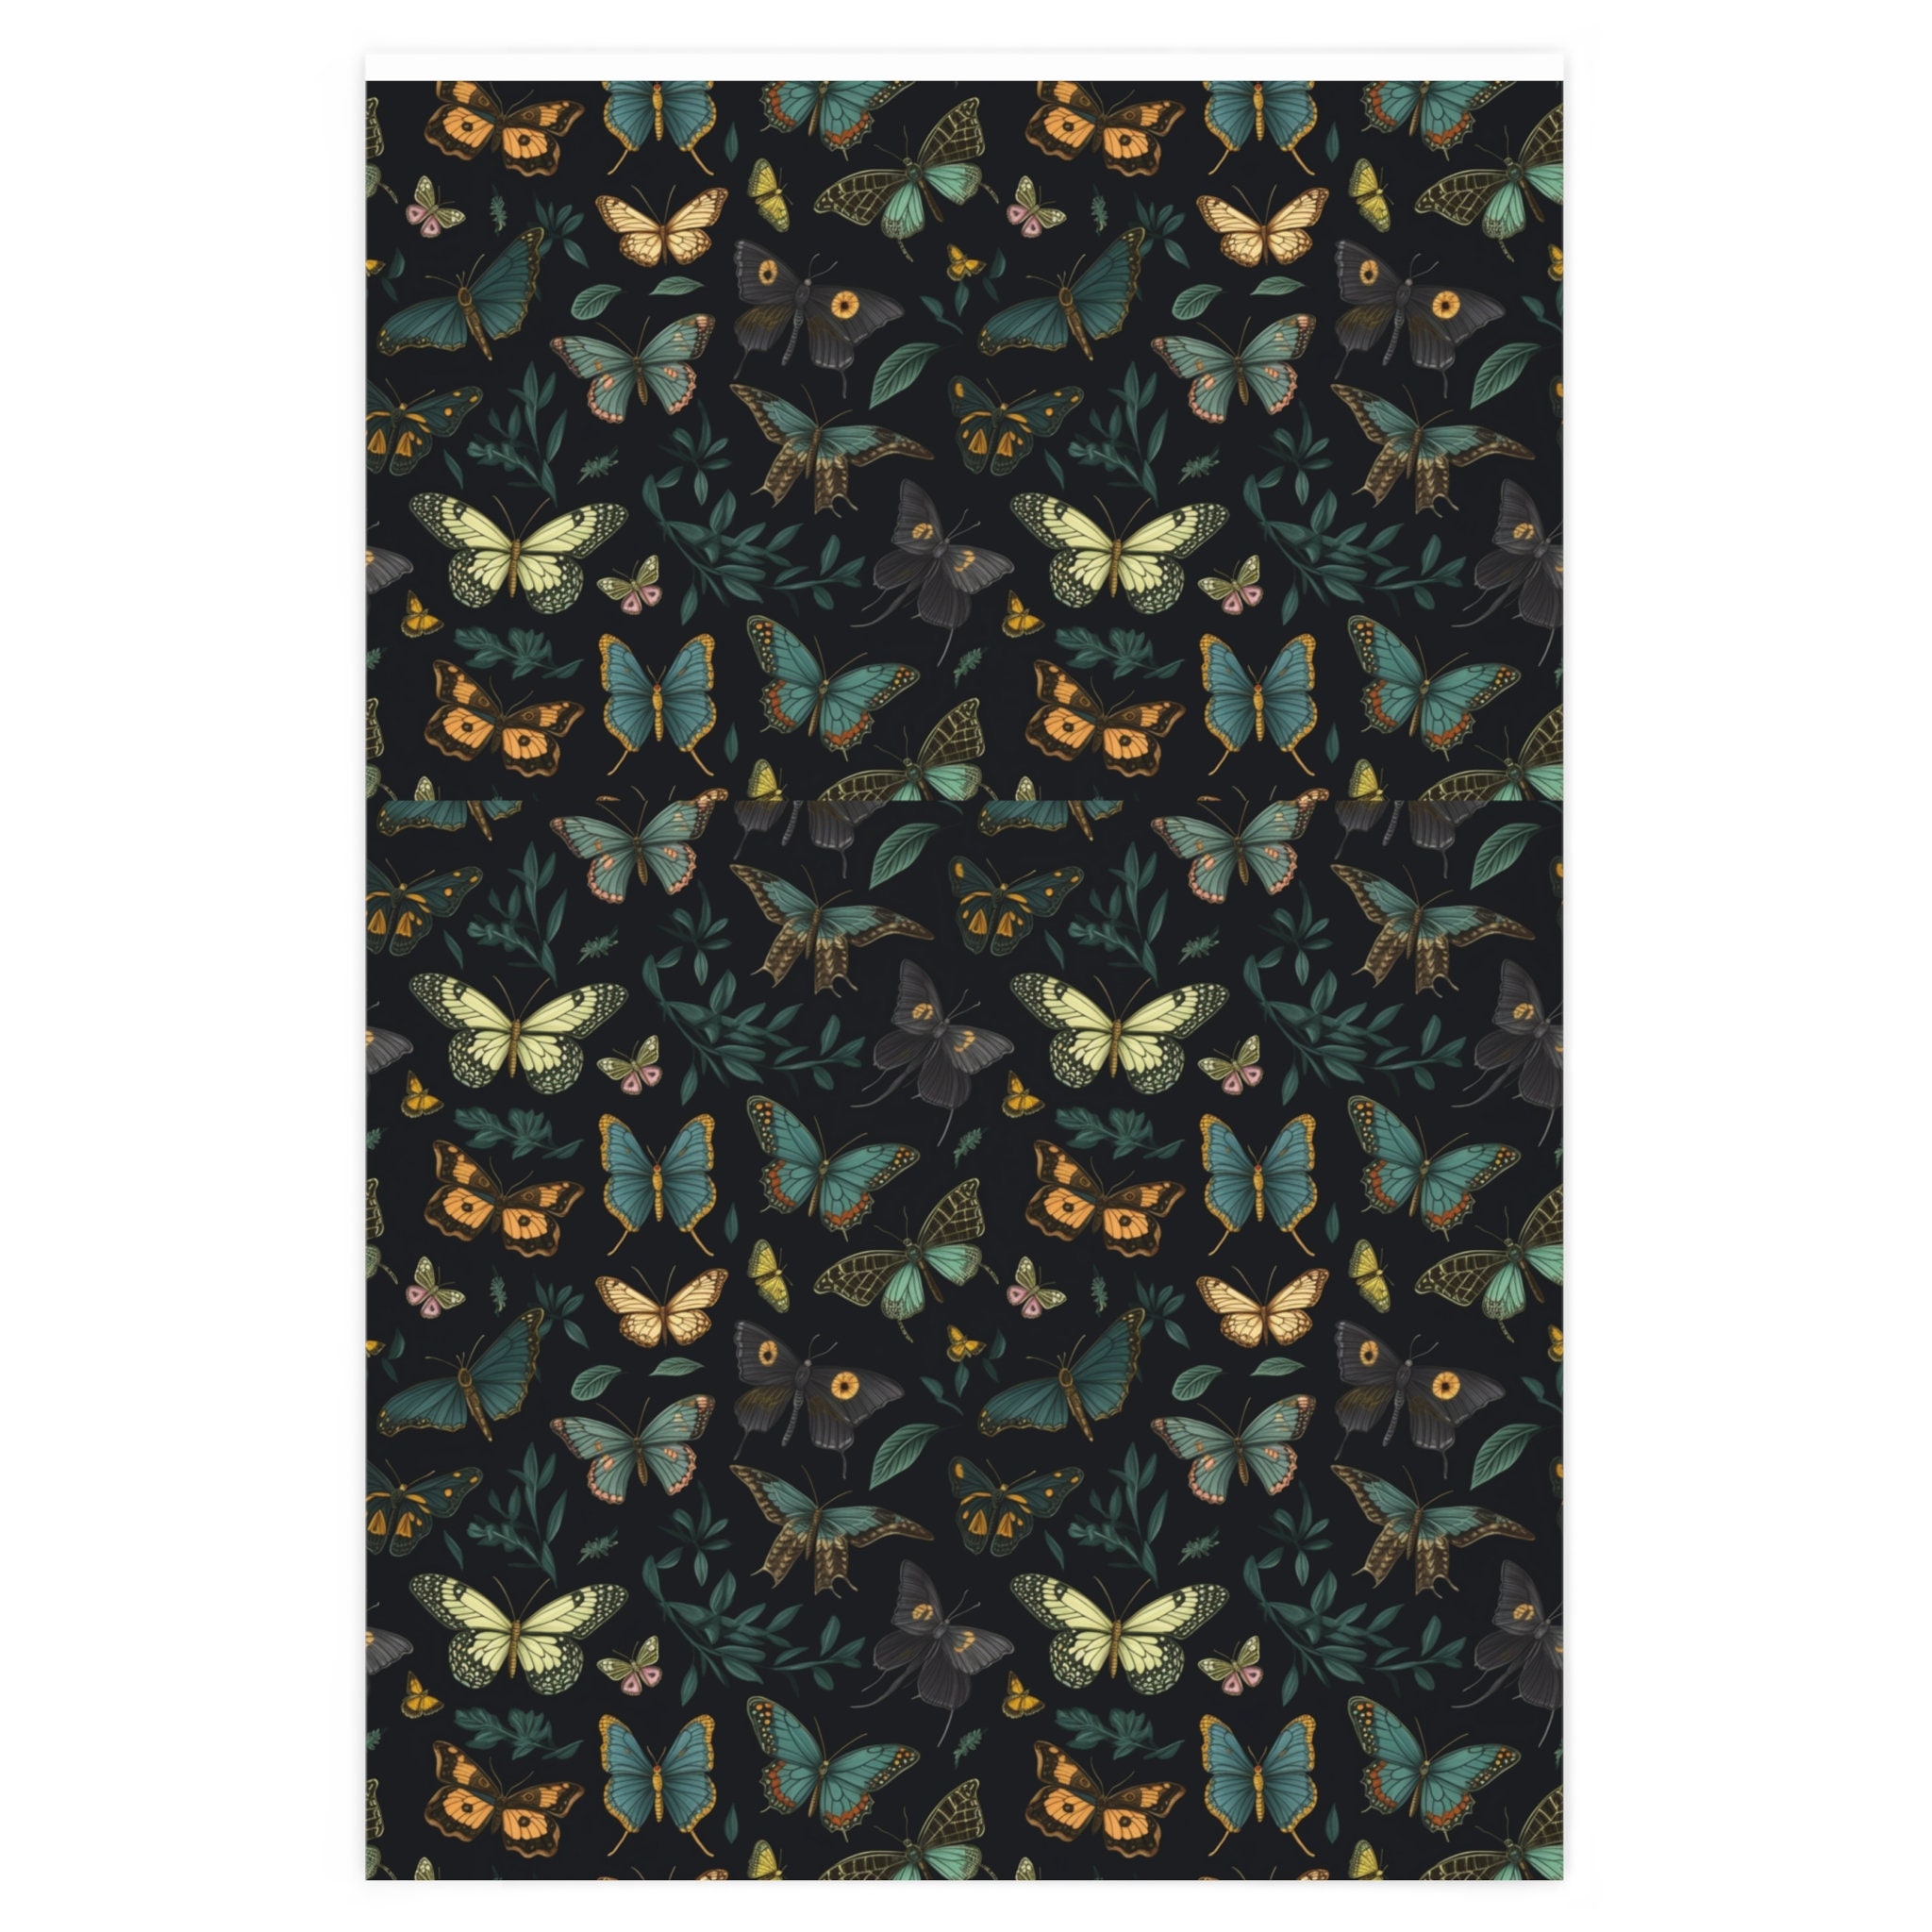 Boho Butterfly Wrapping Paper, Gothic Dark Moth Gift Wrap